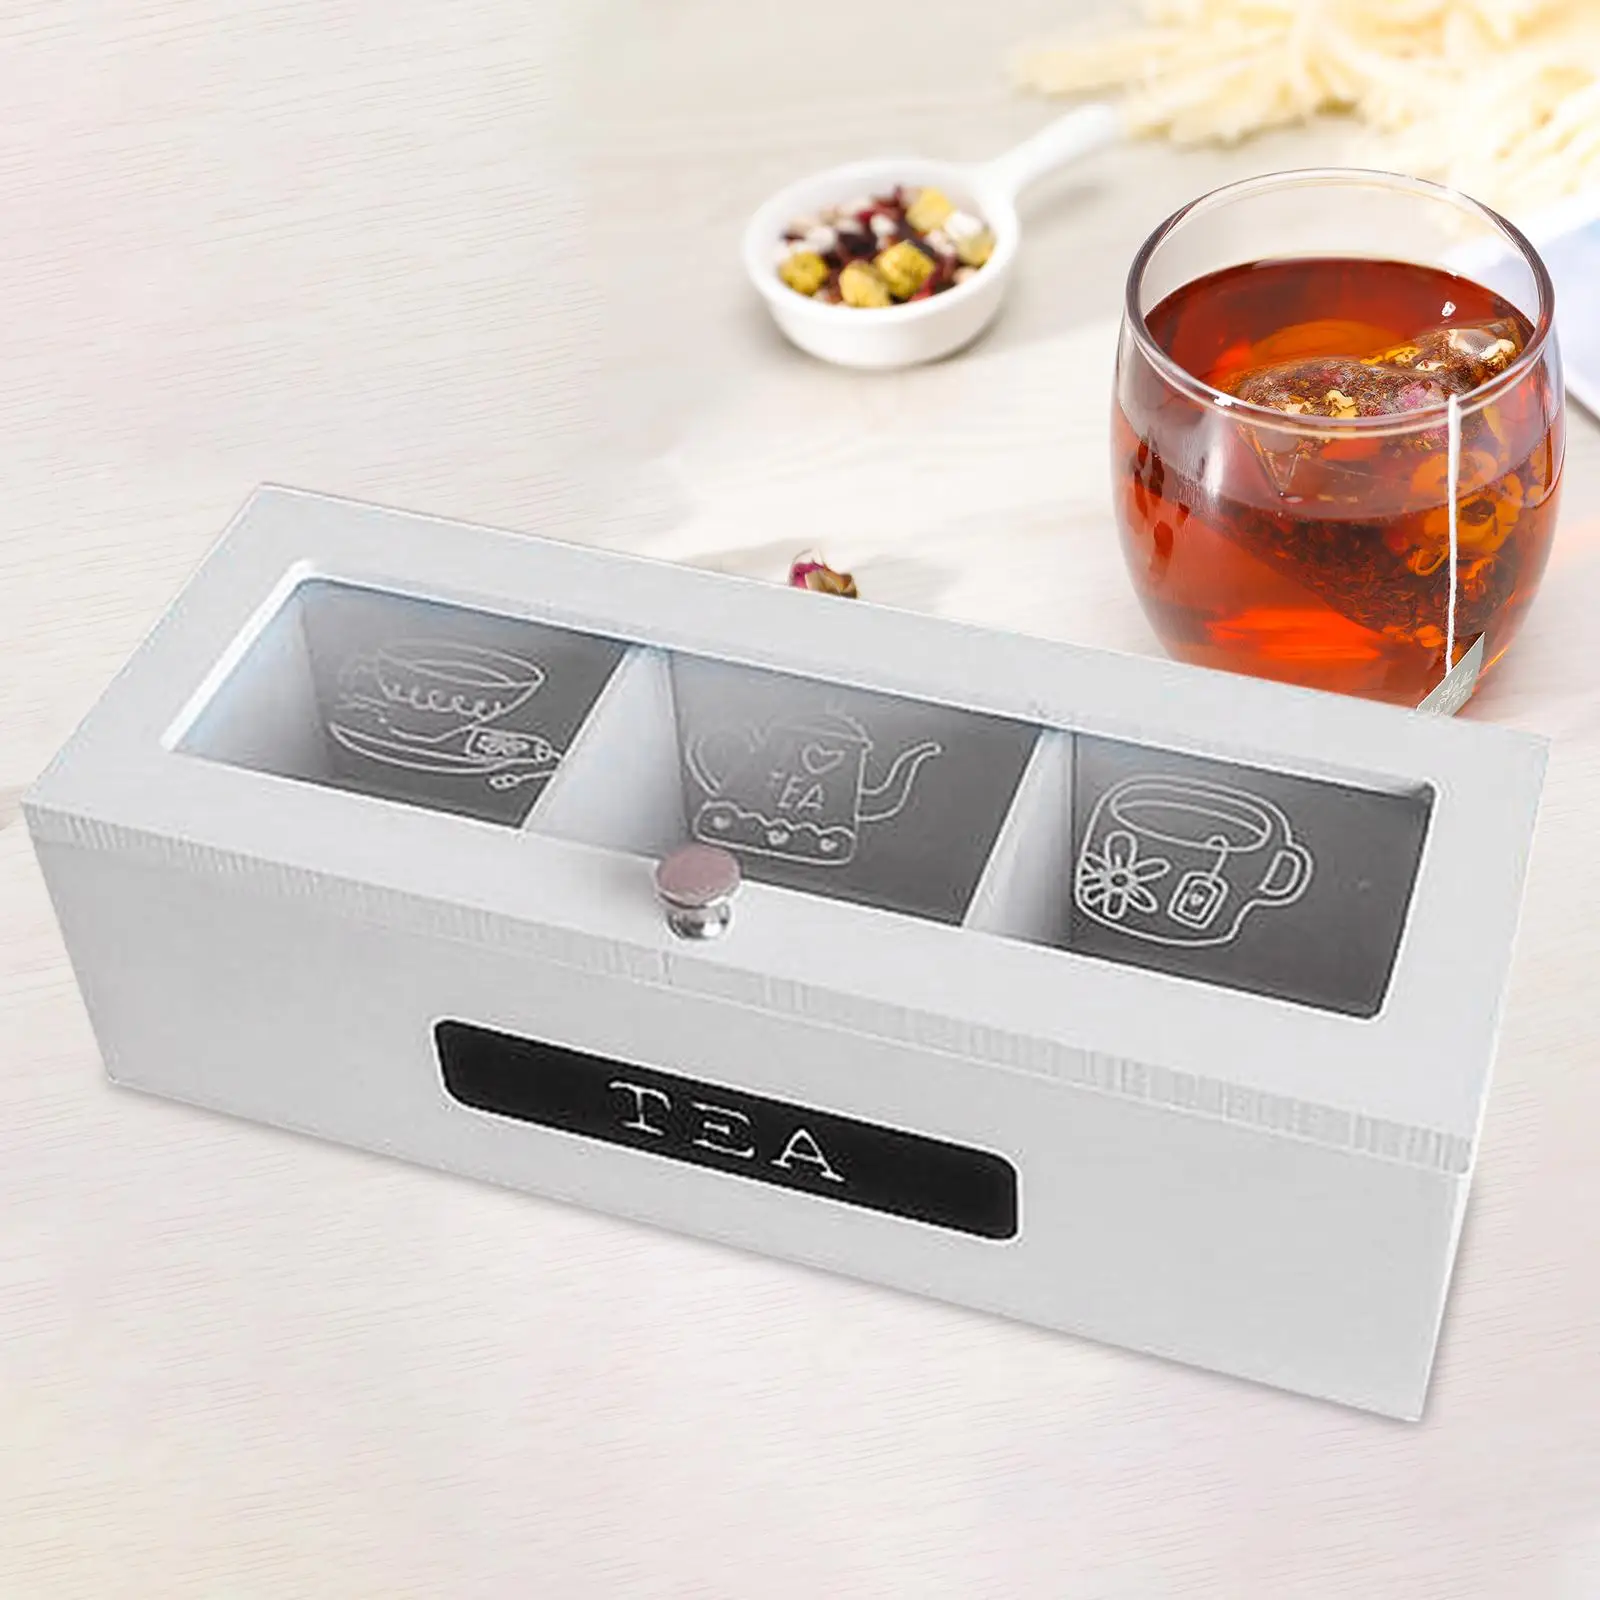 Tea Bag Organizer with 3 Compartment Elegant and Practical Storage Box for Display Tea Bags Snacks Seasoning Packets Creamers